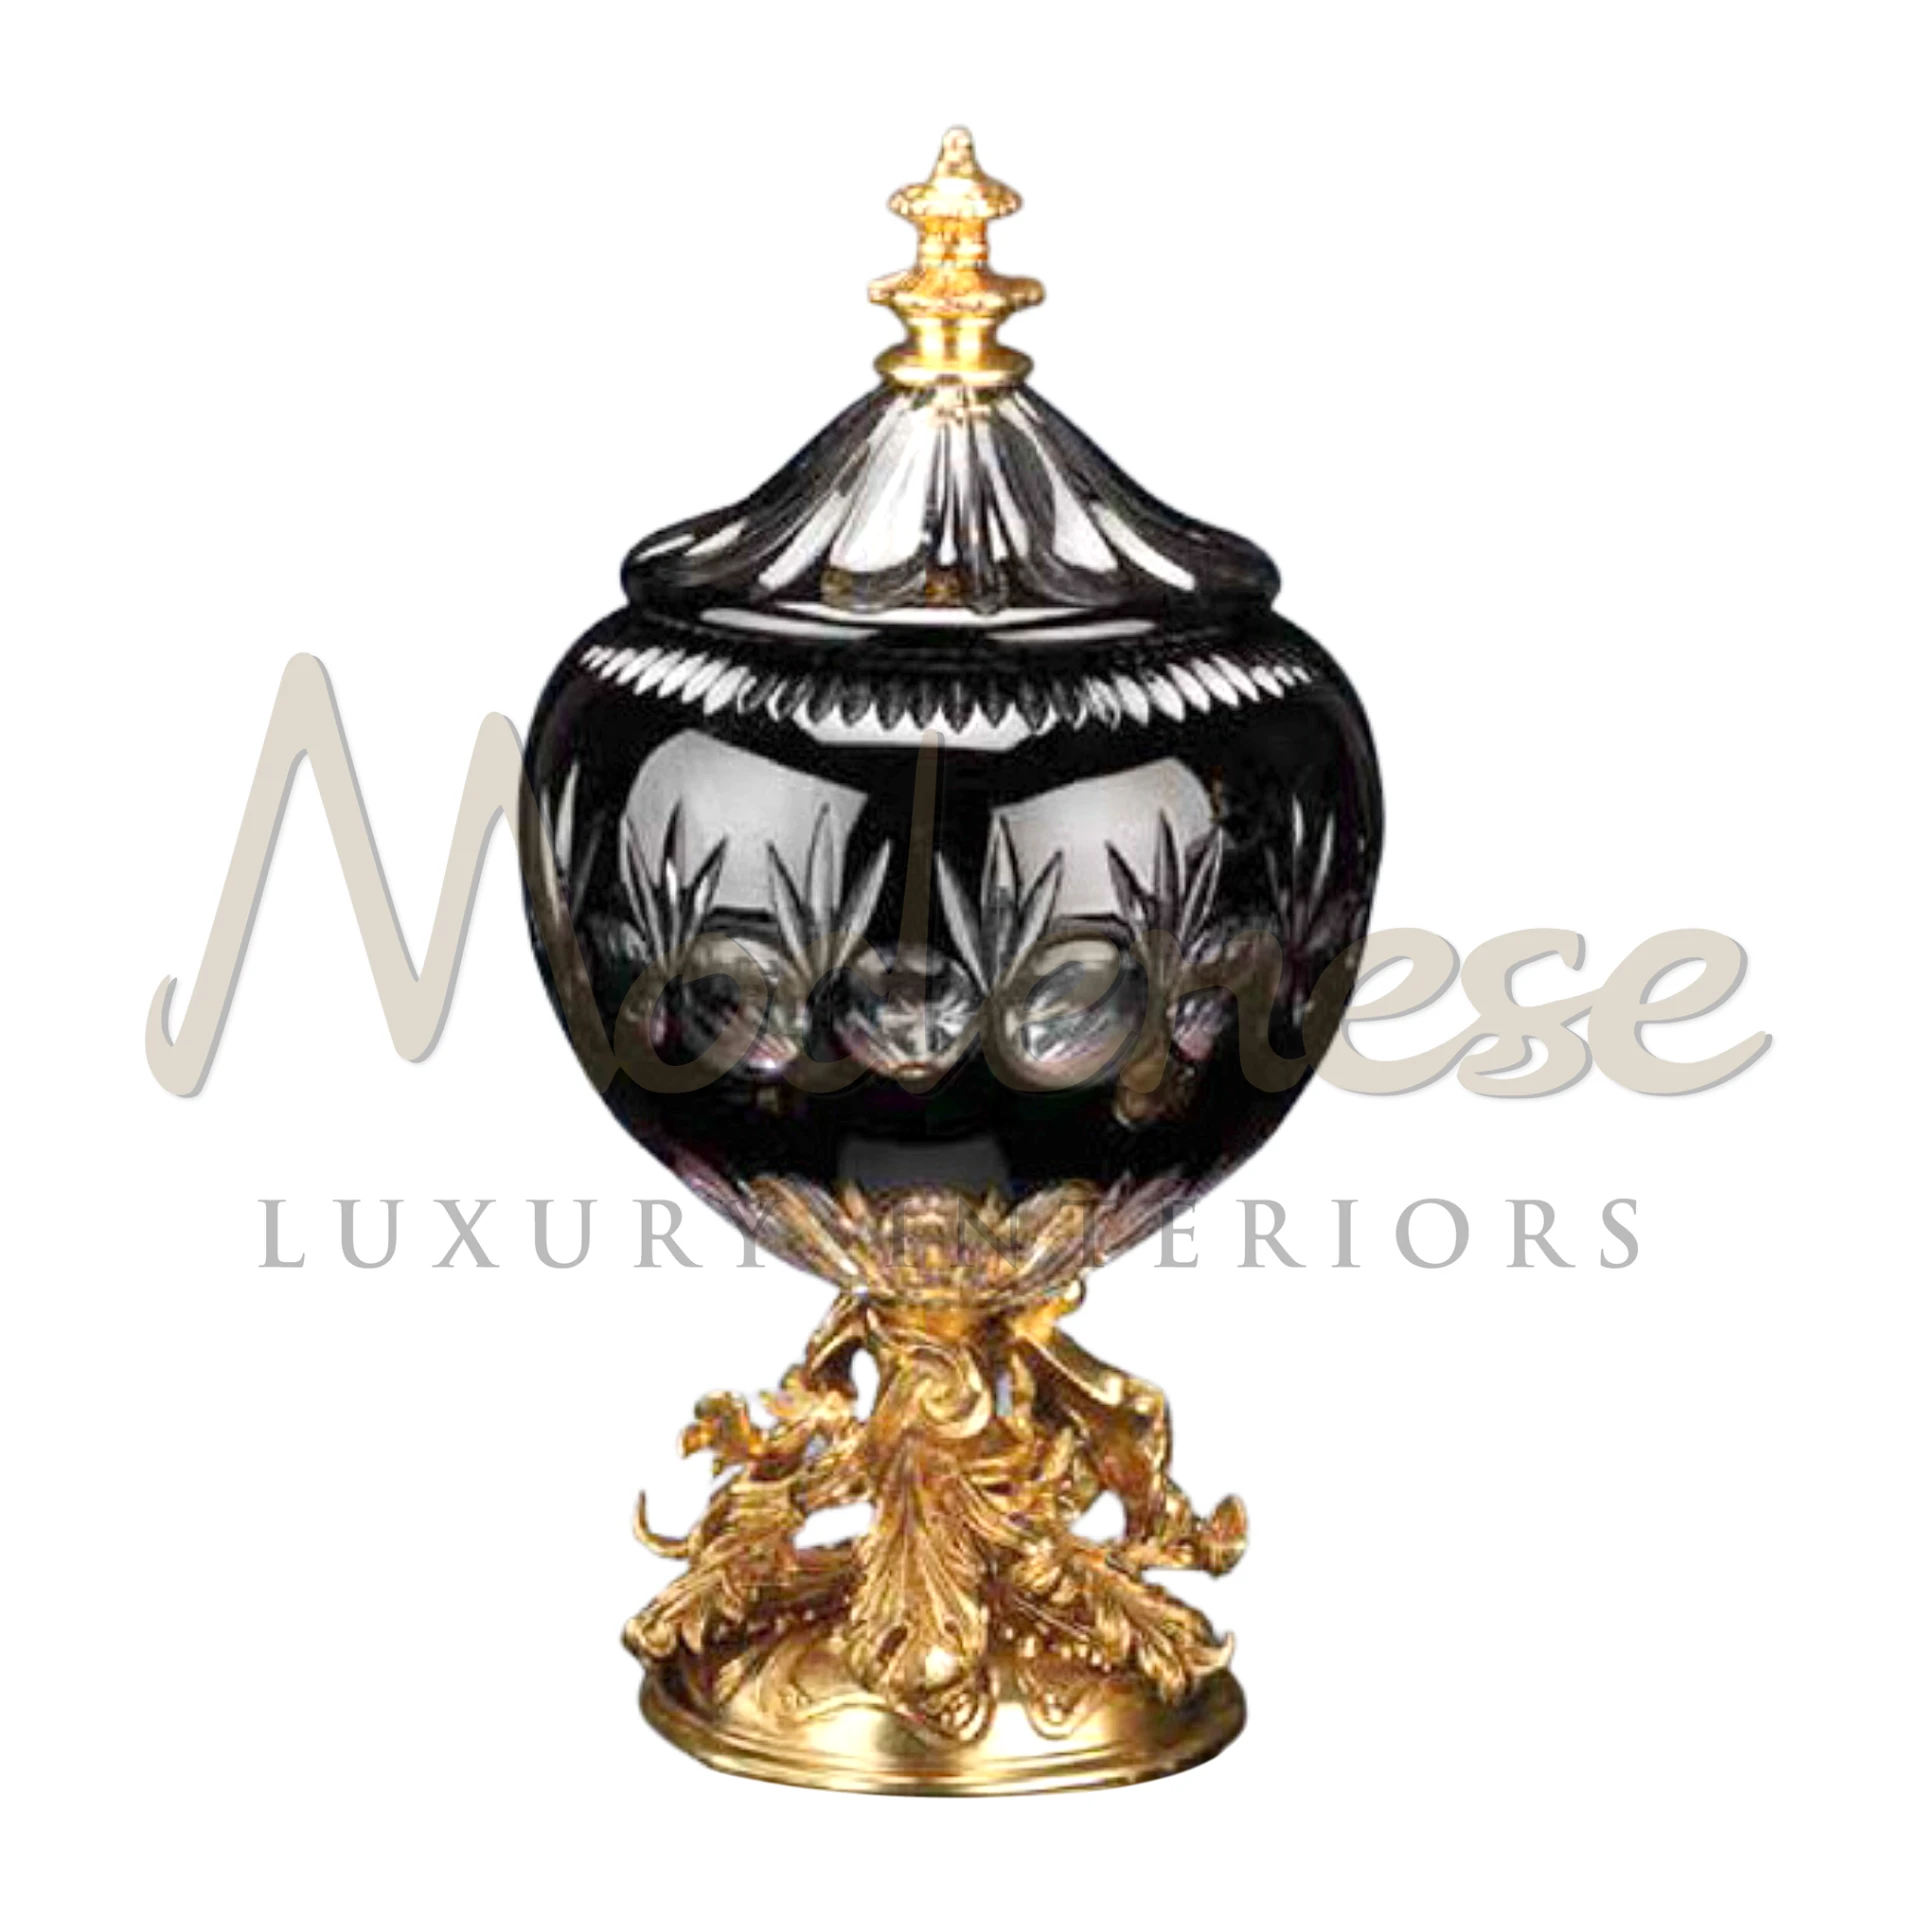 Exquisite Black Box in leather or metal, offering sleek and luxurious storage for jewelry or valuables, perfect for adding a sophisticated touch to luxury interiors.






